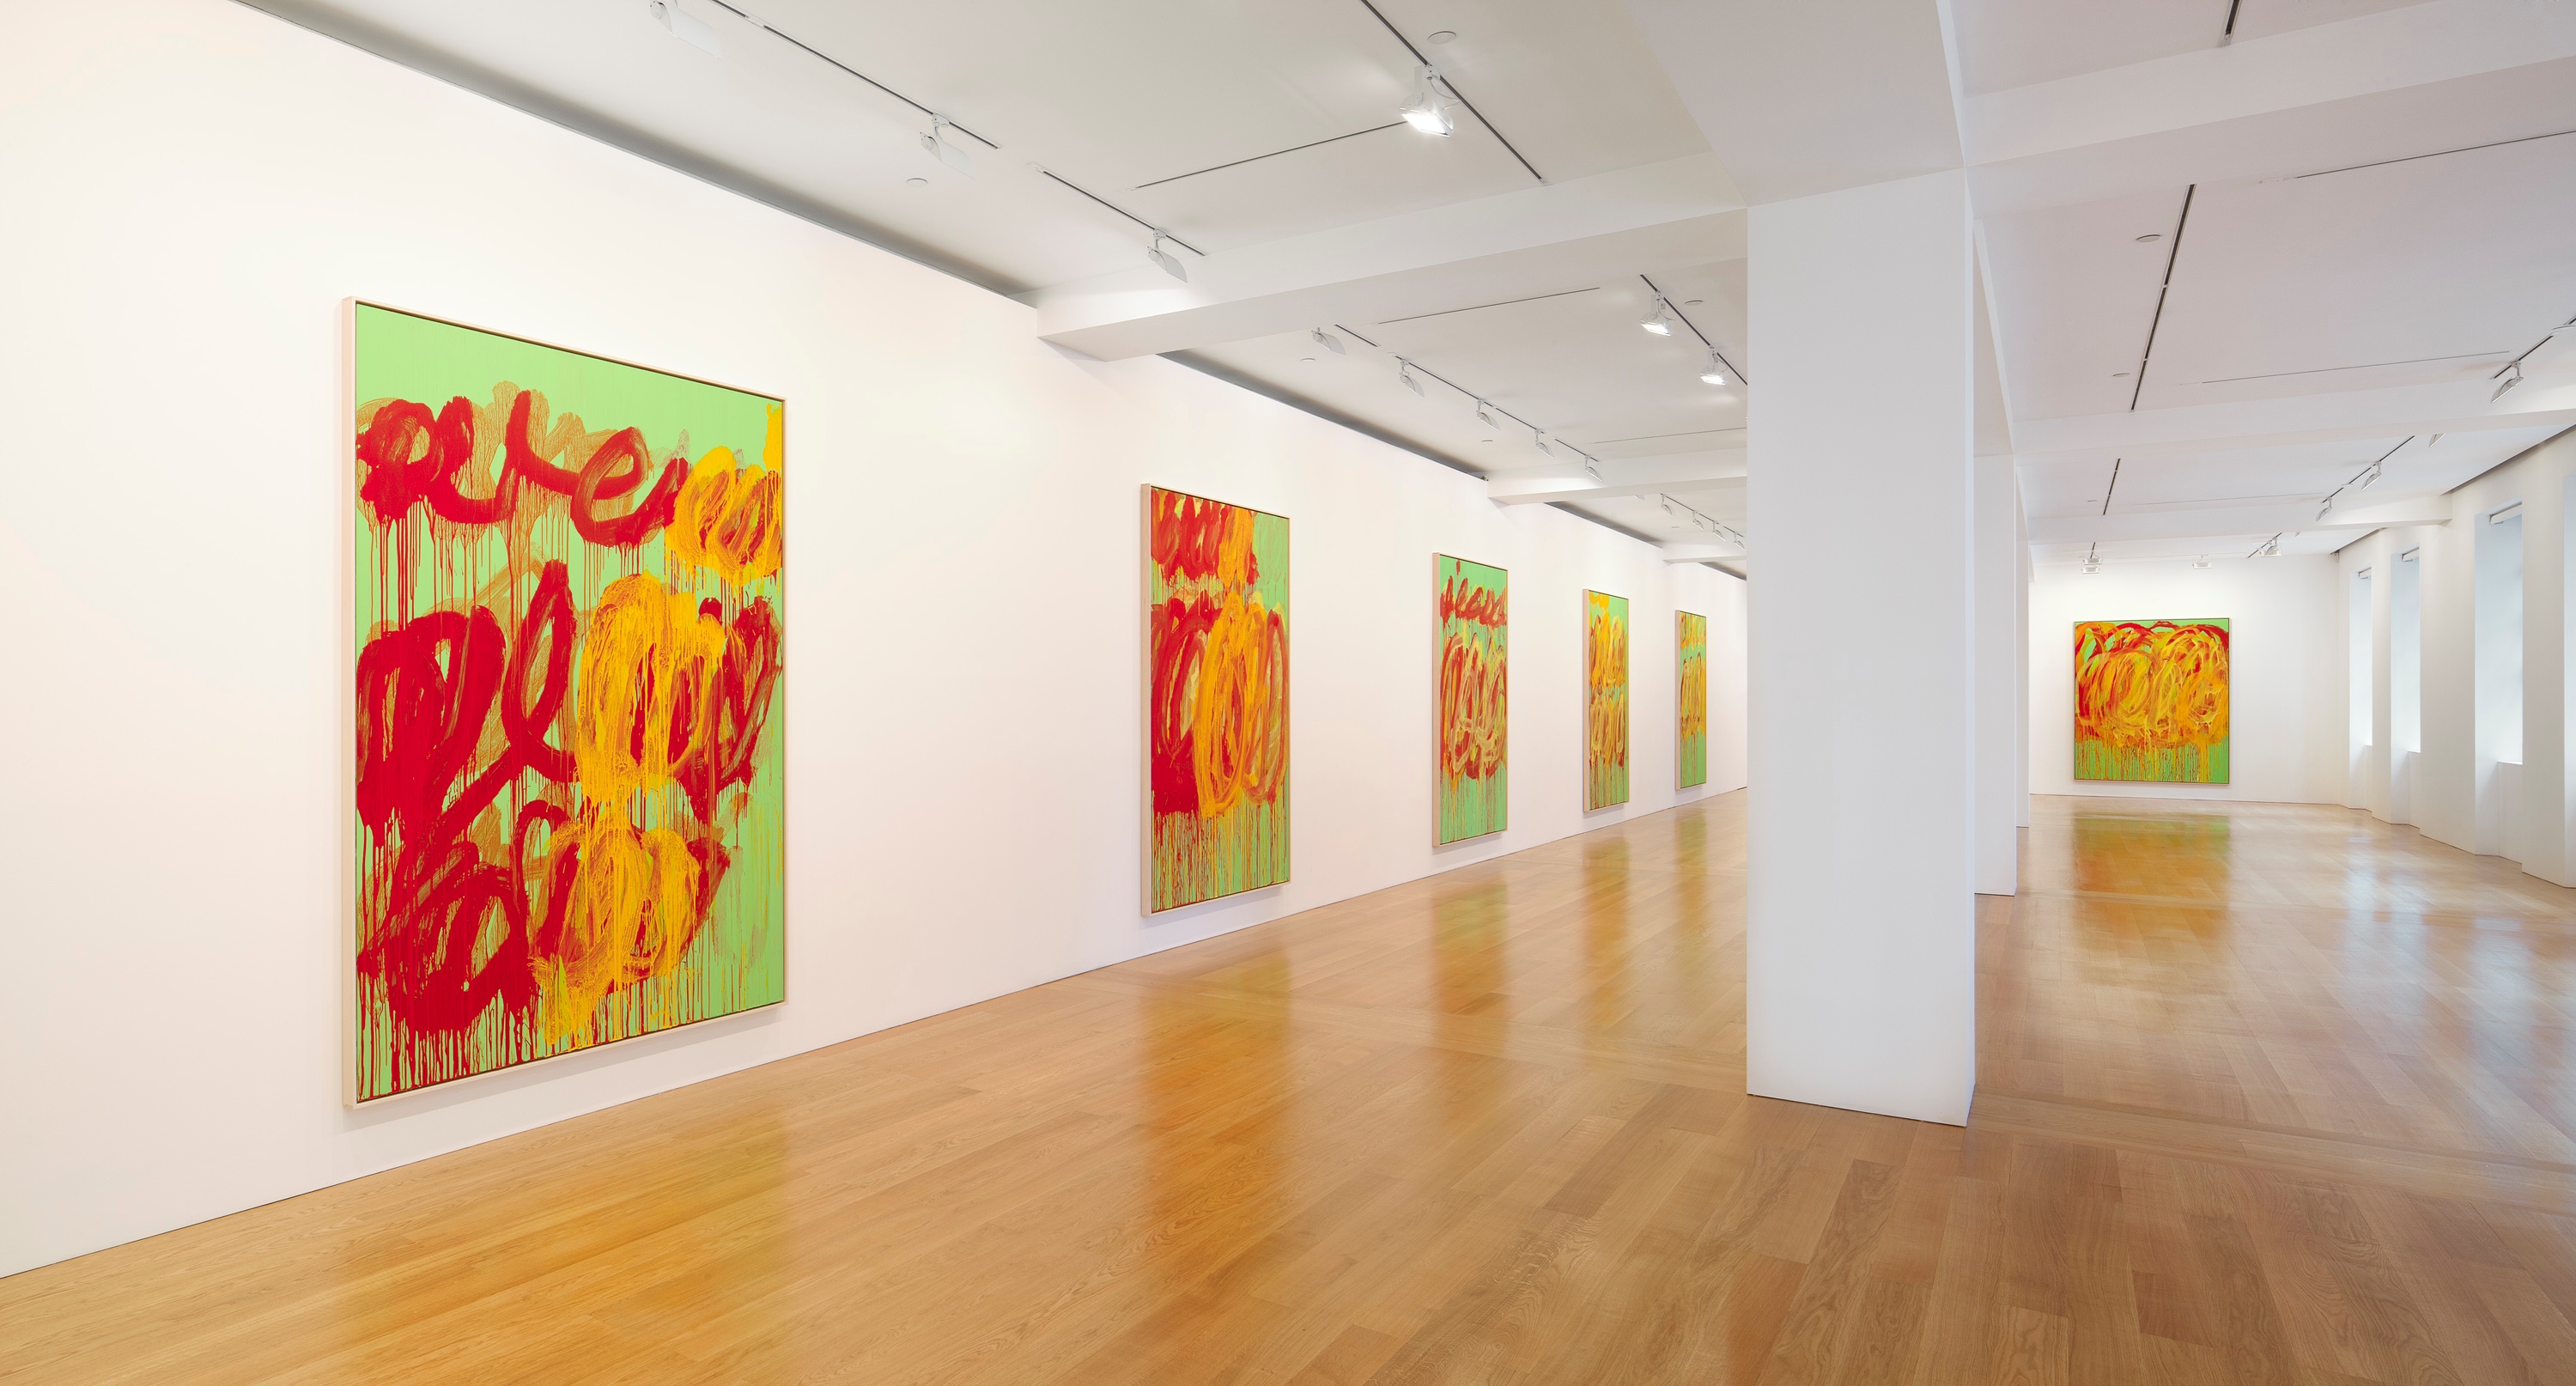 Installation view of Cy Twombly: The Last Paintings at Gagosian Gallery Hong Kong, June 28 - August 11, 2012. Courtesy Gagosian Gallery.